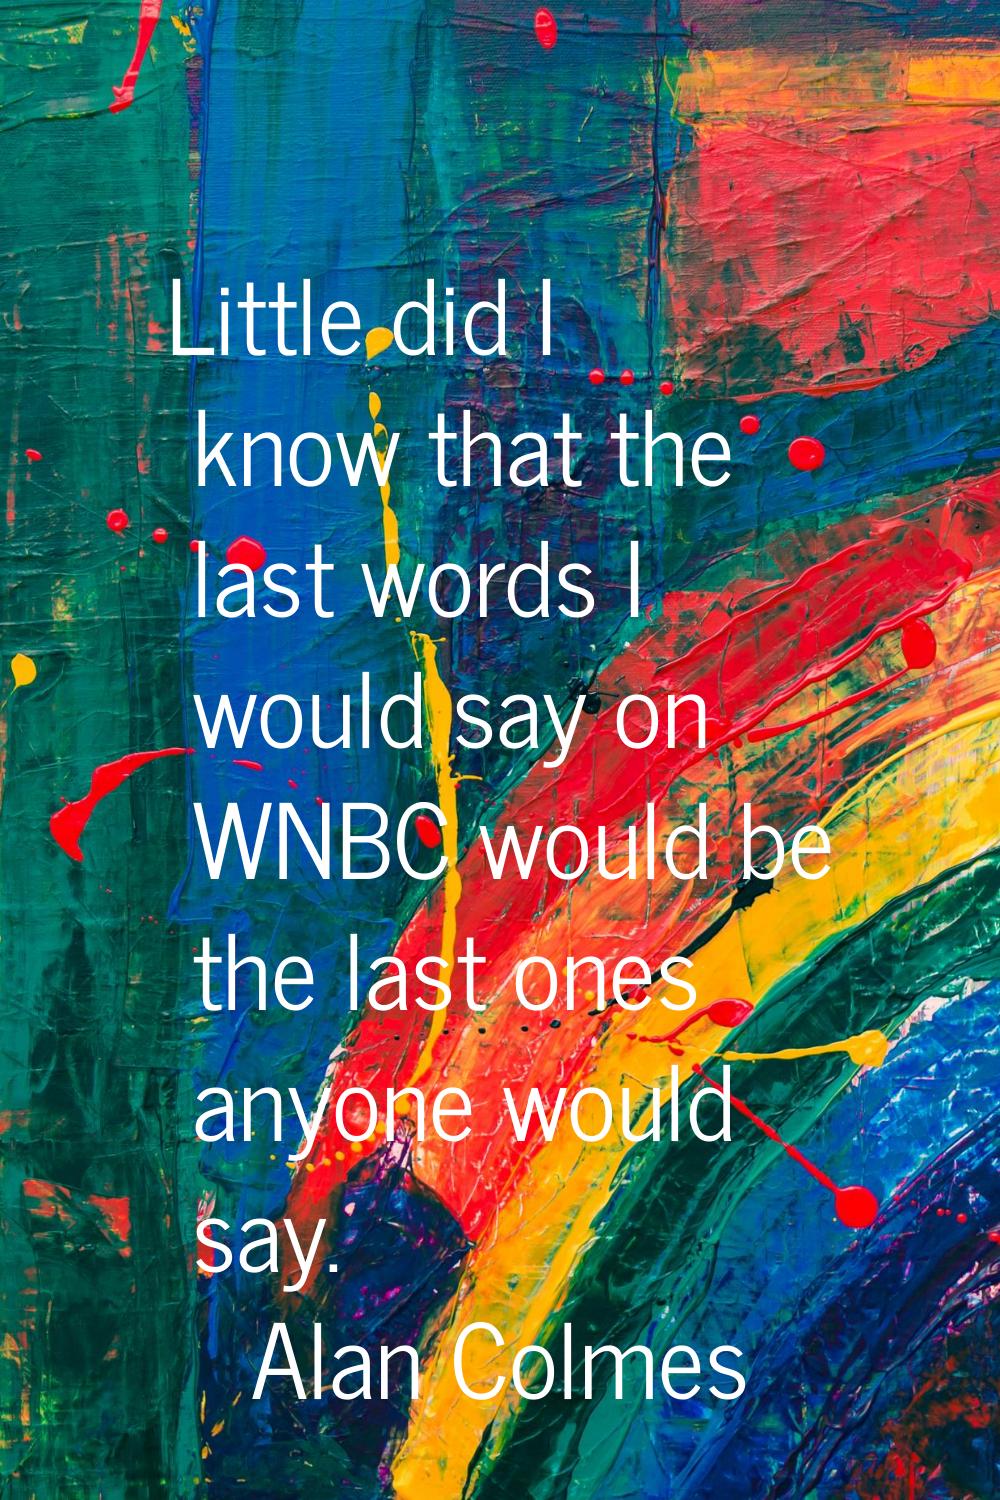 Little did I know that the last words I would say on WNBC would be the last ones anyone would say.